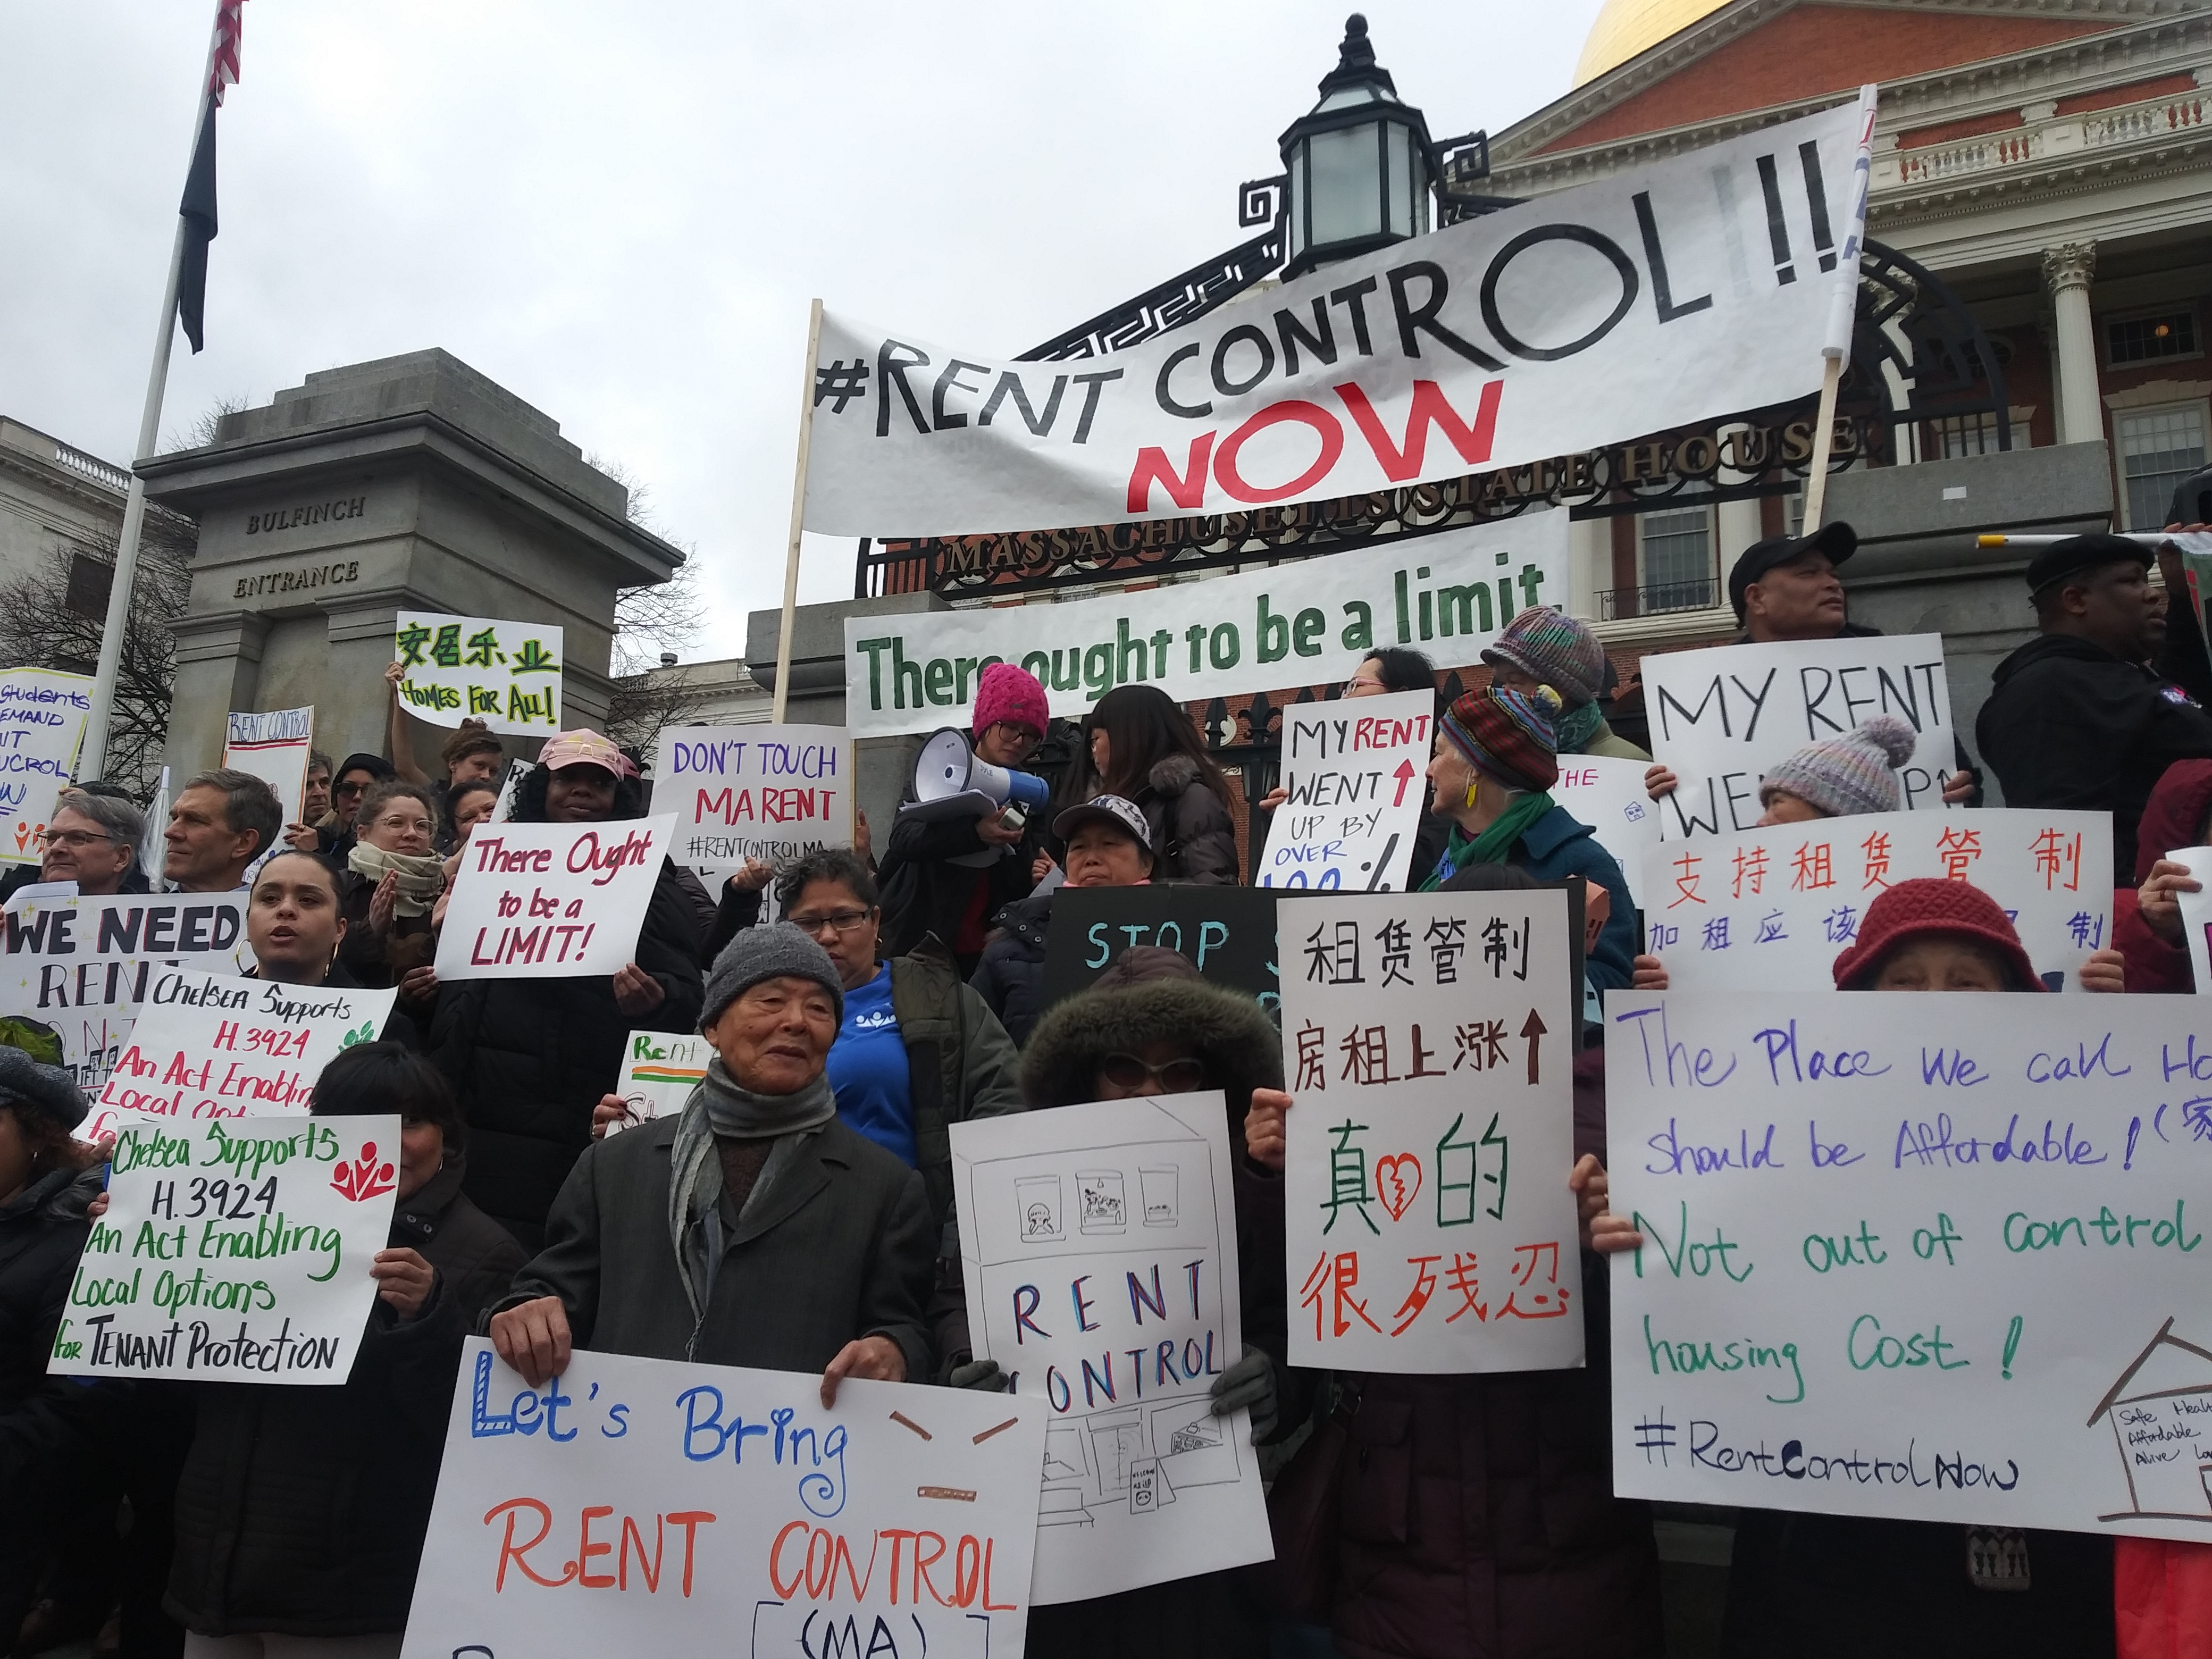 Hearing on rent control draws supportive tenants and activists